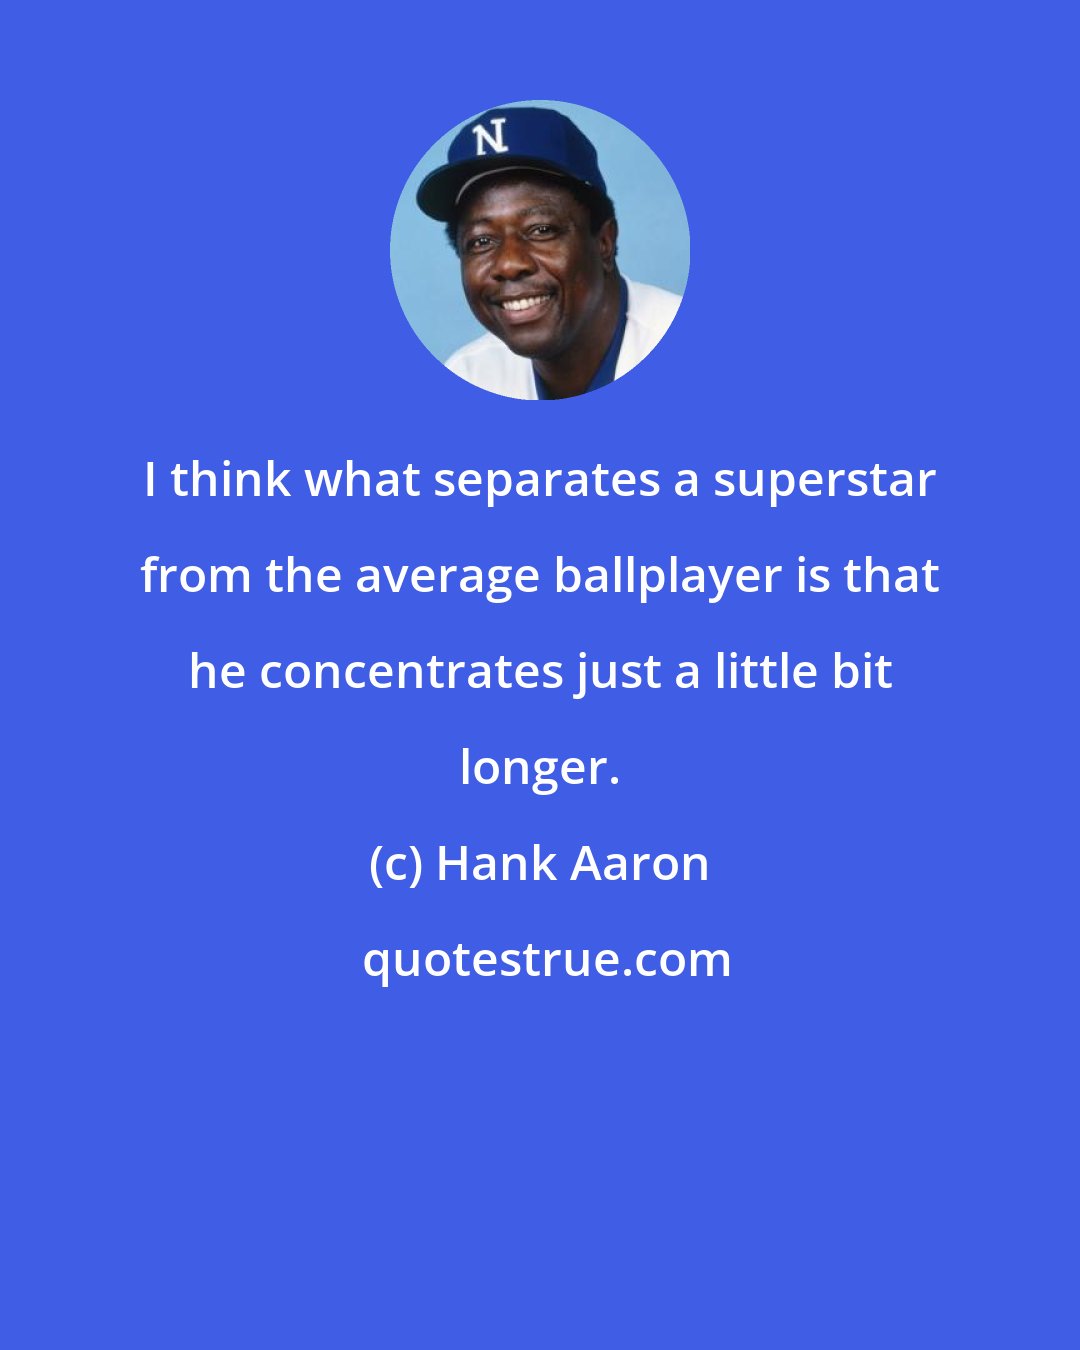 Hank Aaron: I think what separates a superstar from the average ballplayer is that he concentrates just a little bit longer.